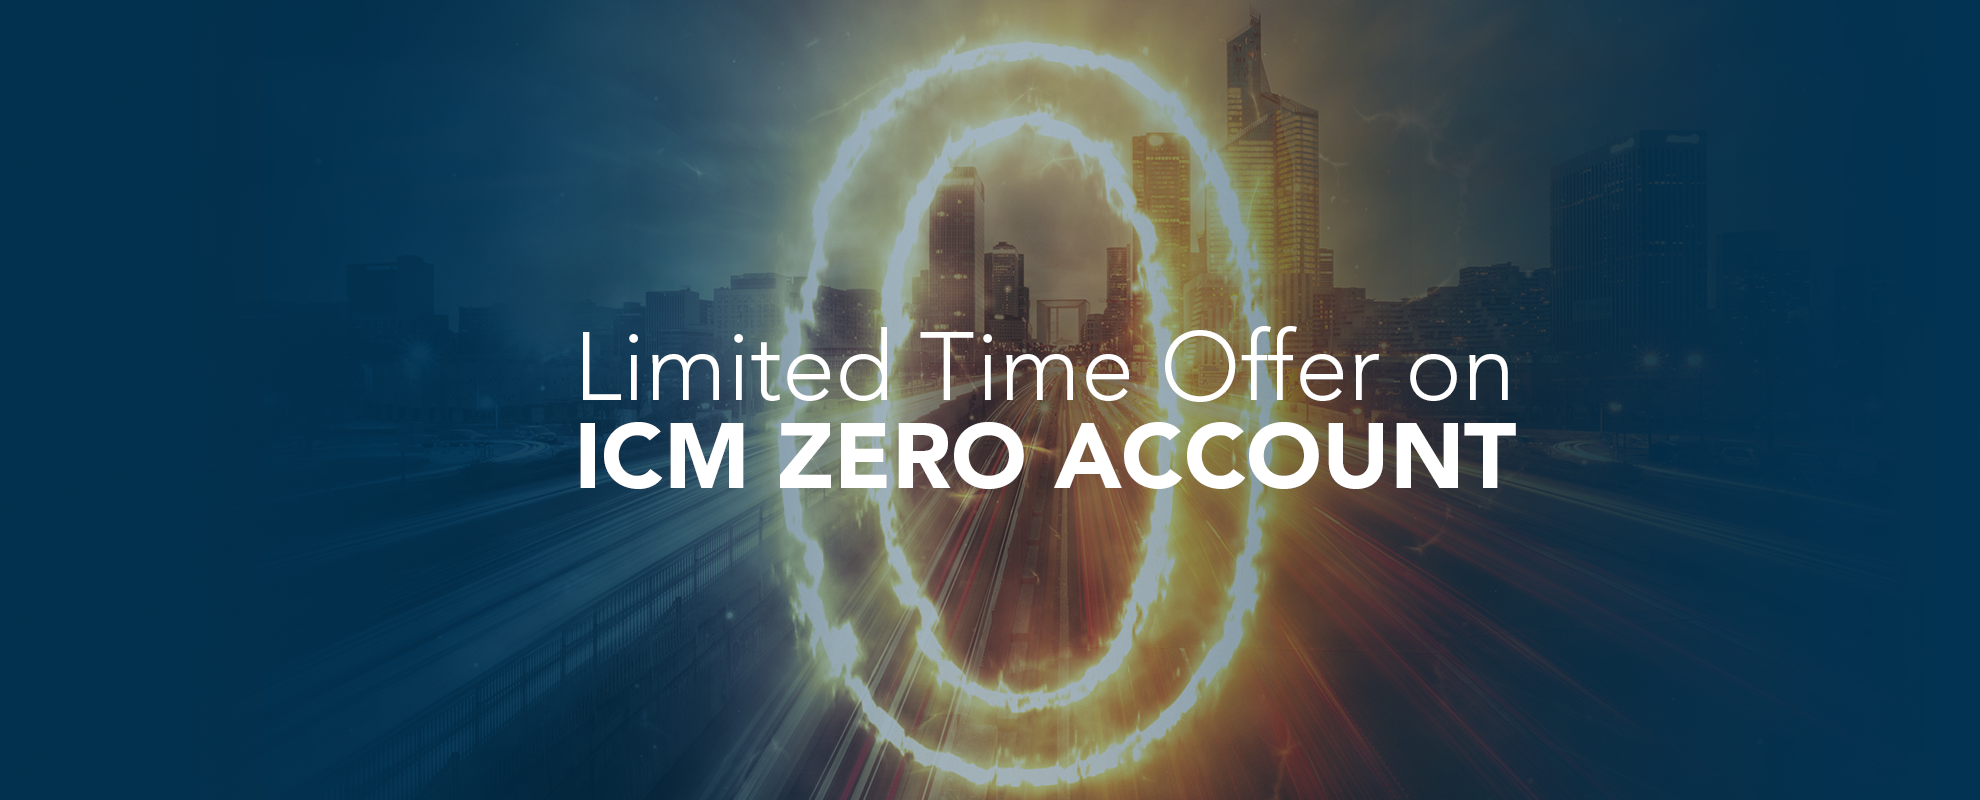 Image of Zero with the Text Limited Time Offer on ICM Zero Account